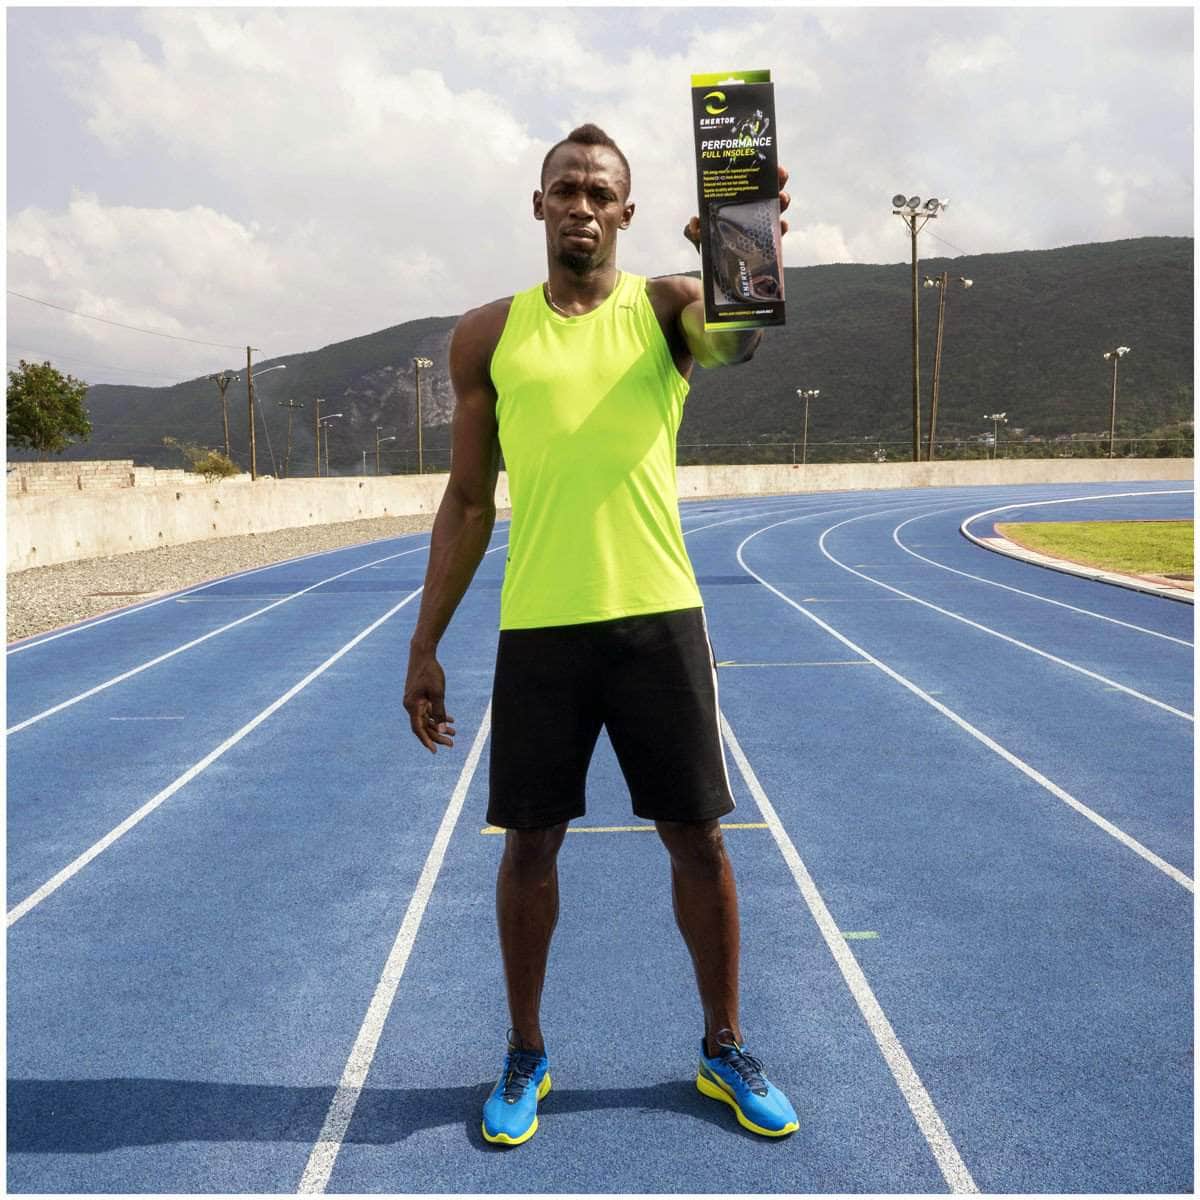 Usain Bolt holding package of Enertor insoles